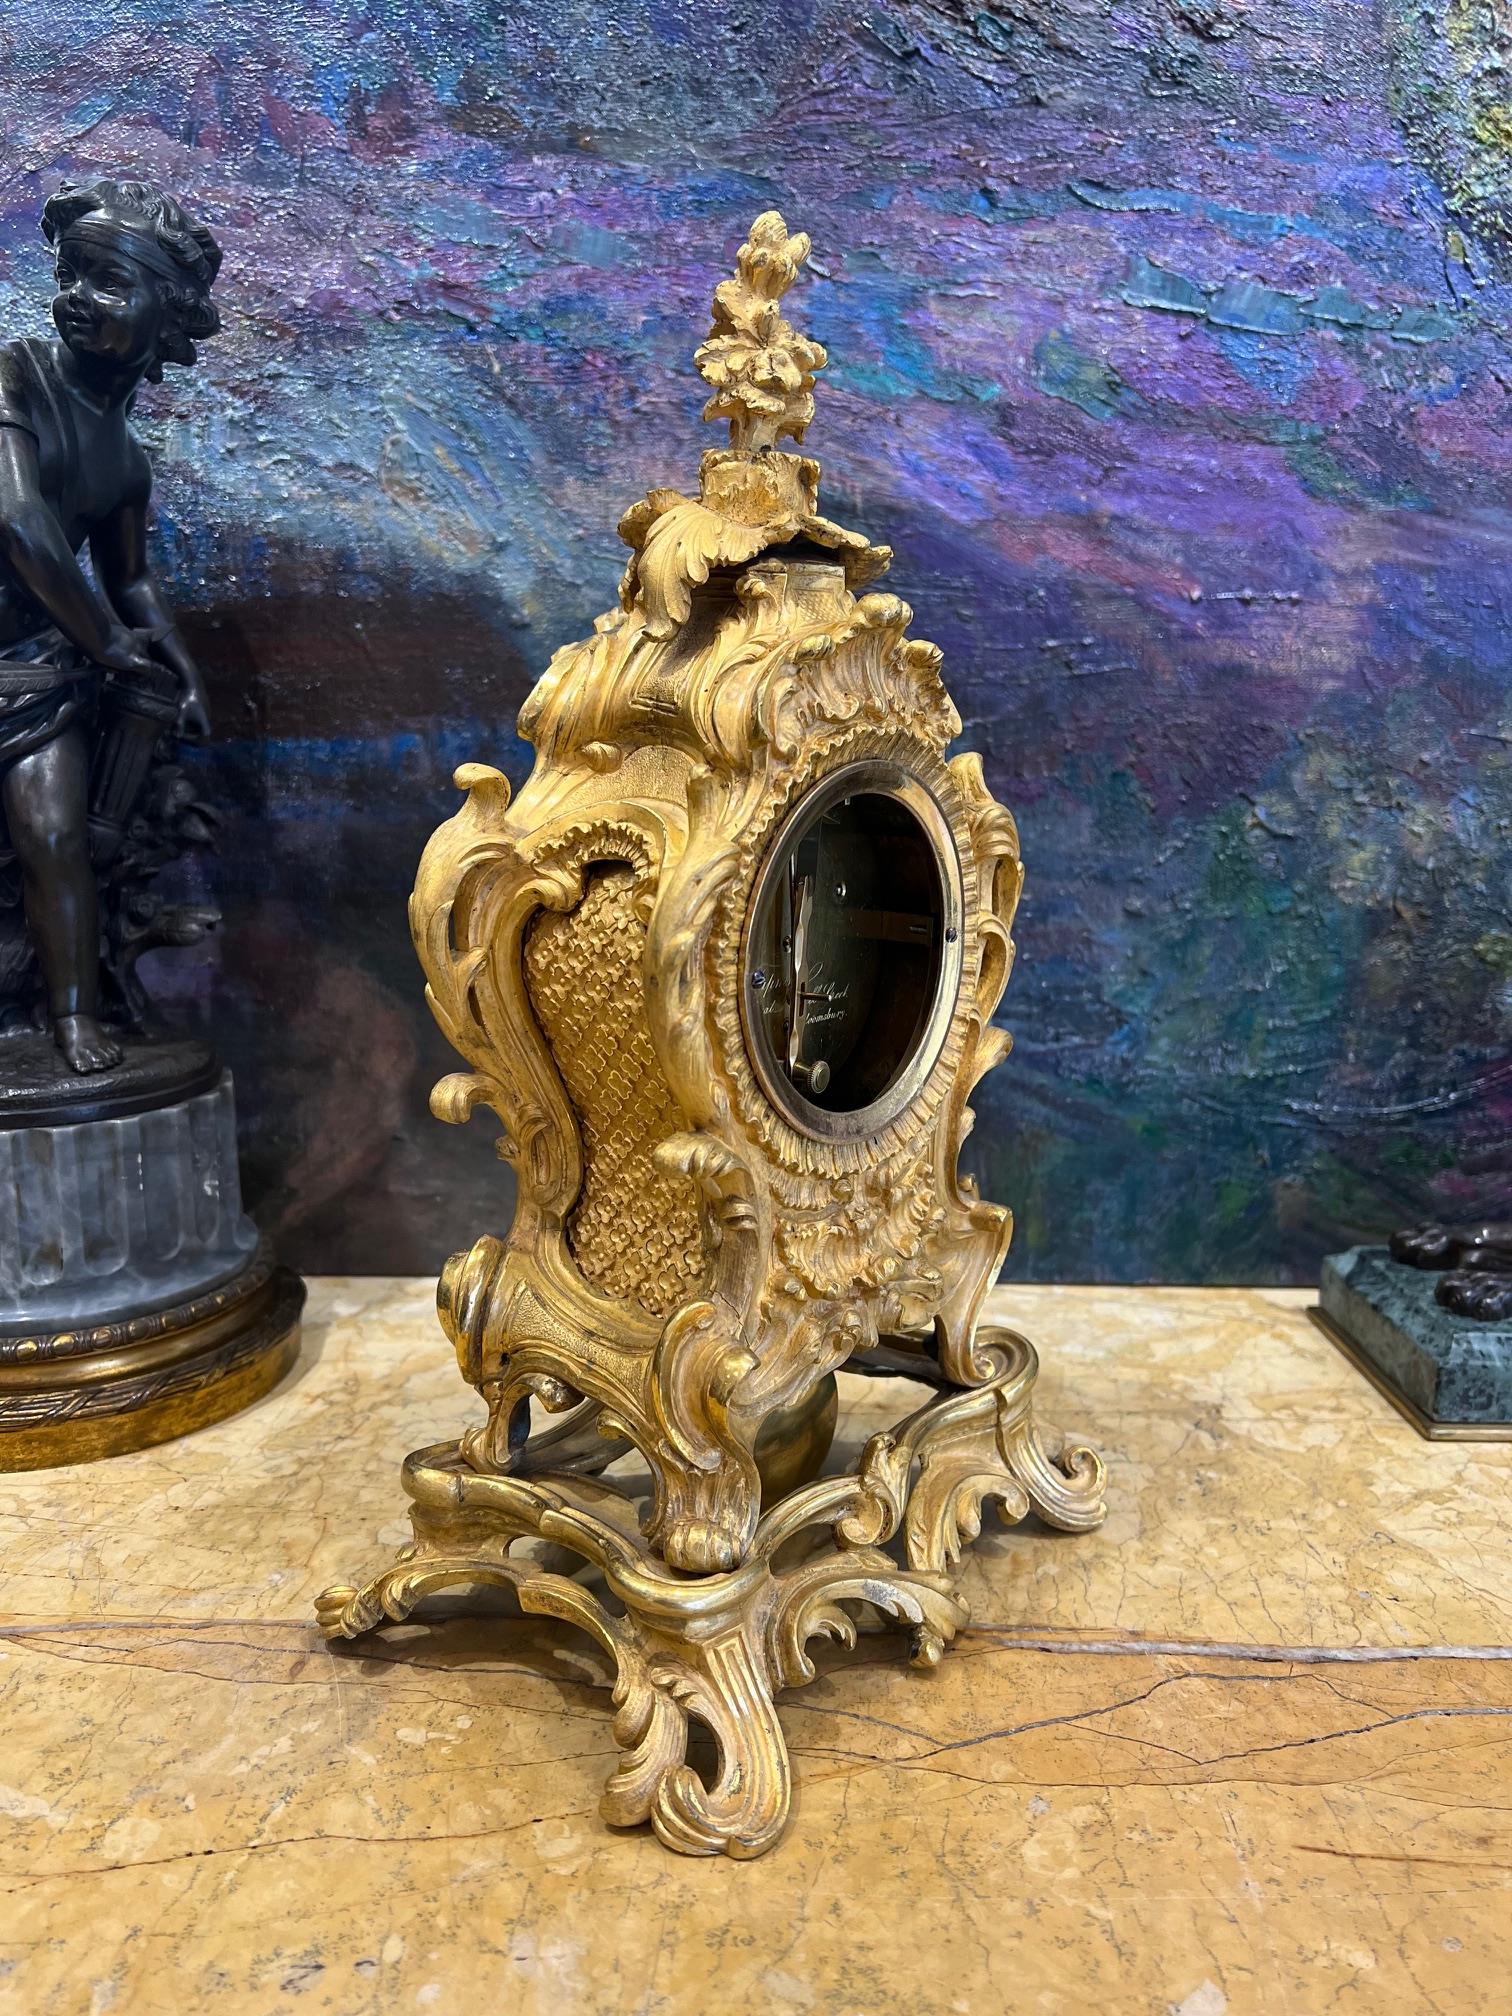 AN EARLY 19TH CENTURY ENGLISH GILT BRONZE FUSEE MANTEL CLOCK - Image 5 of 8